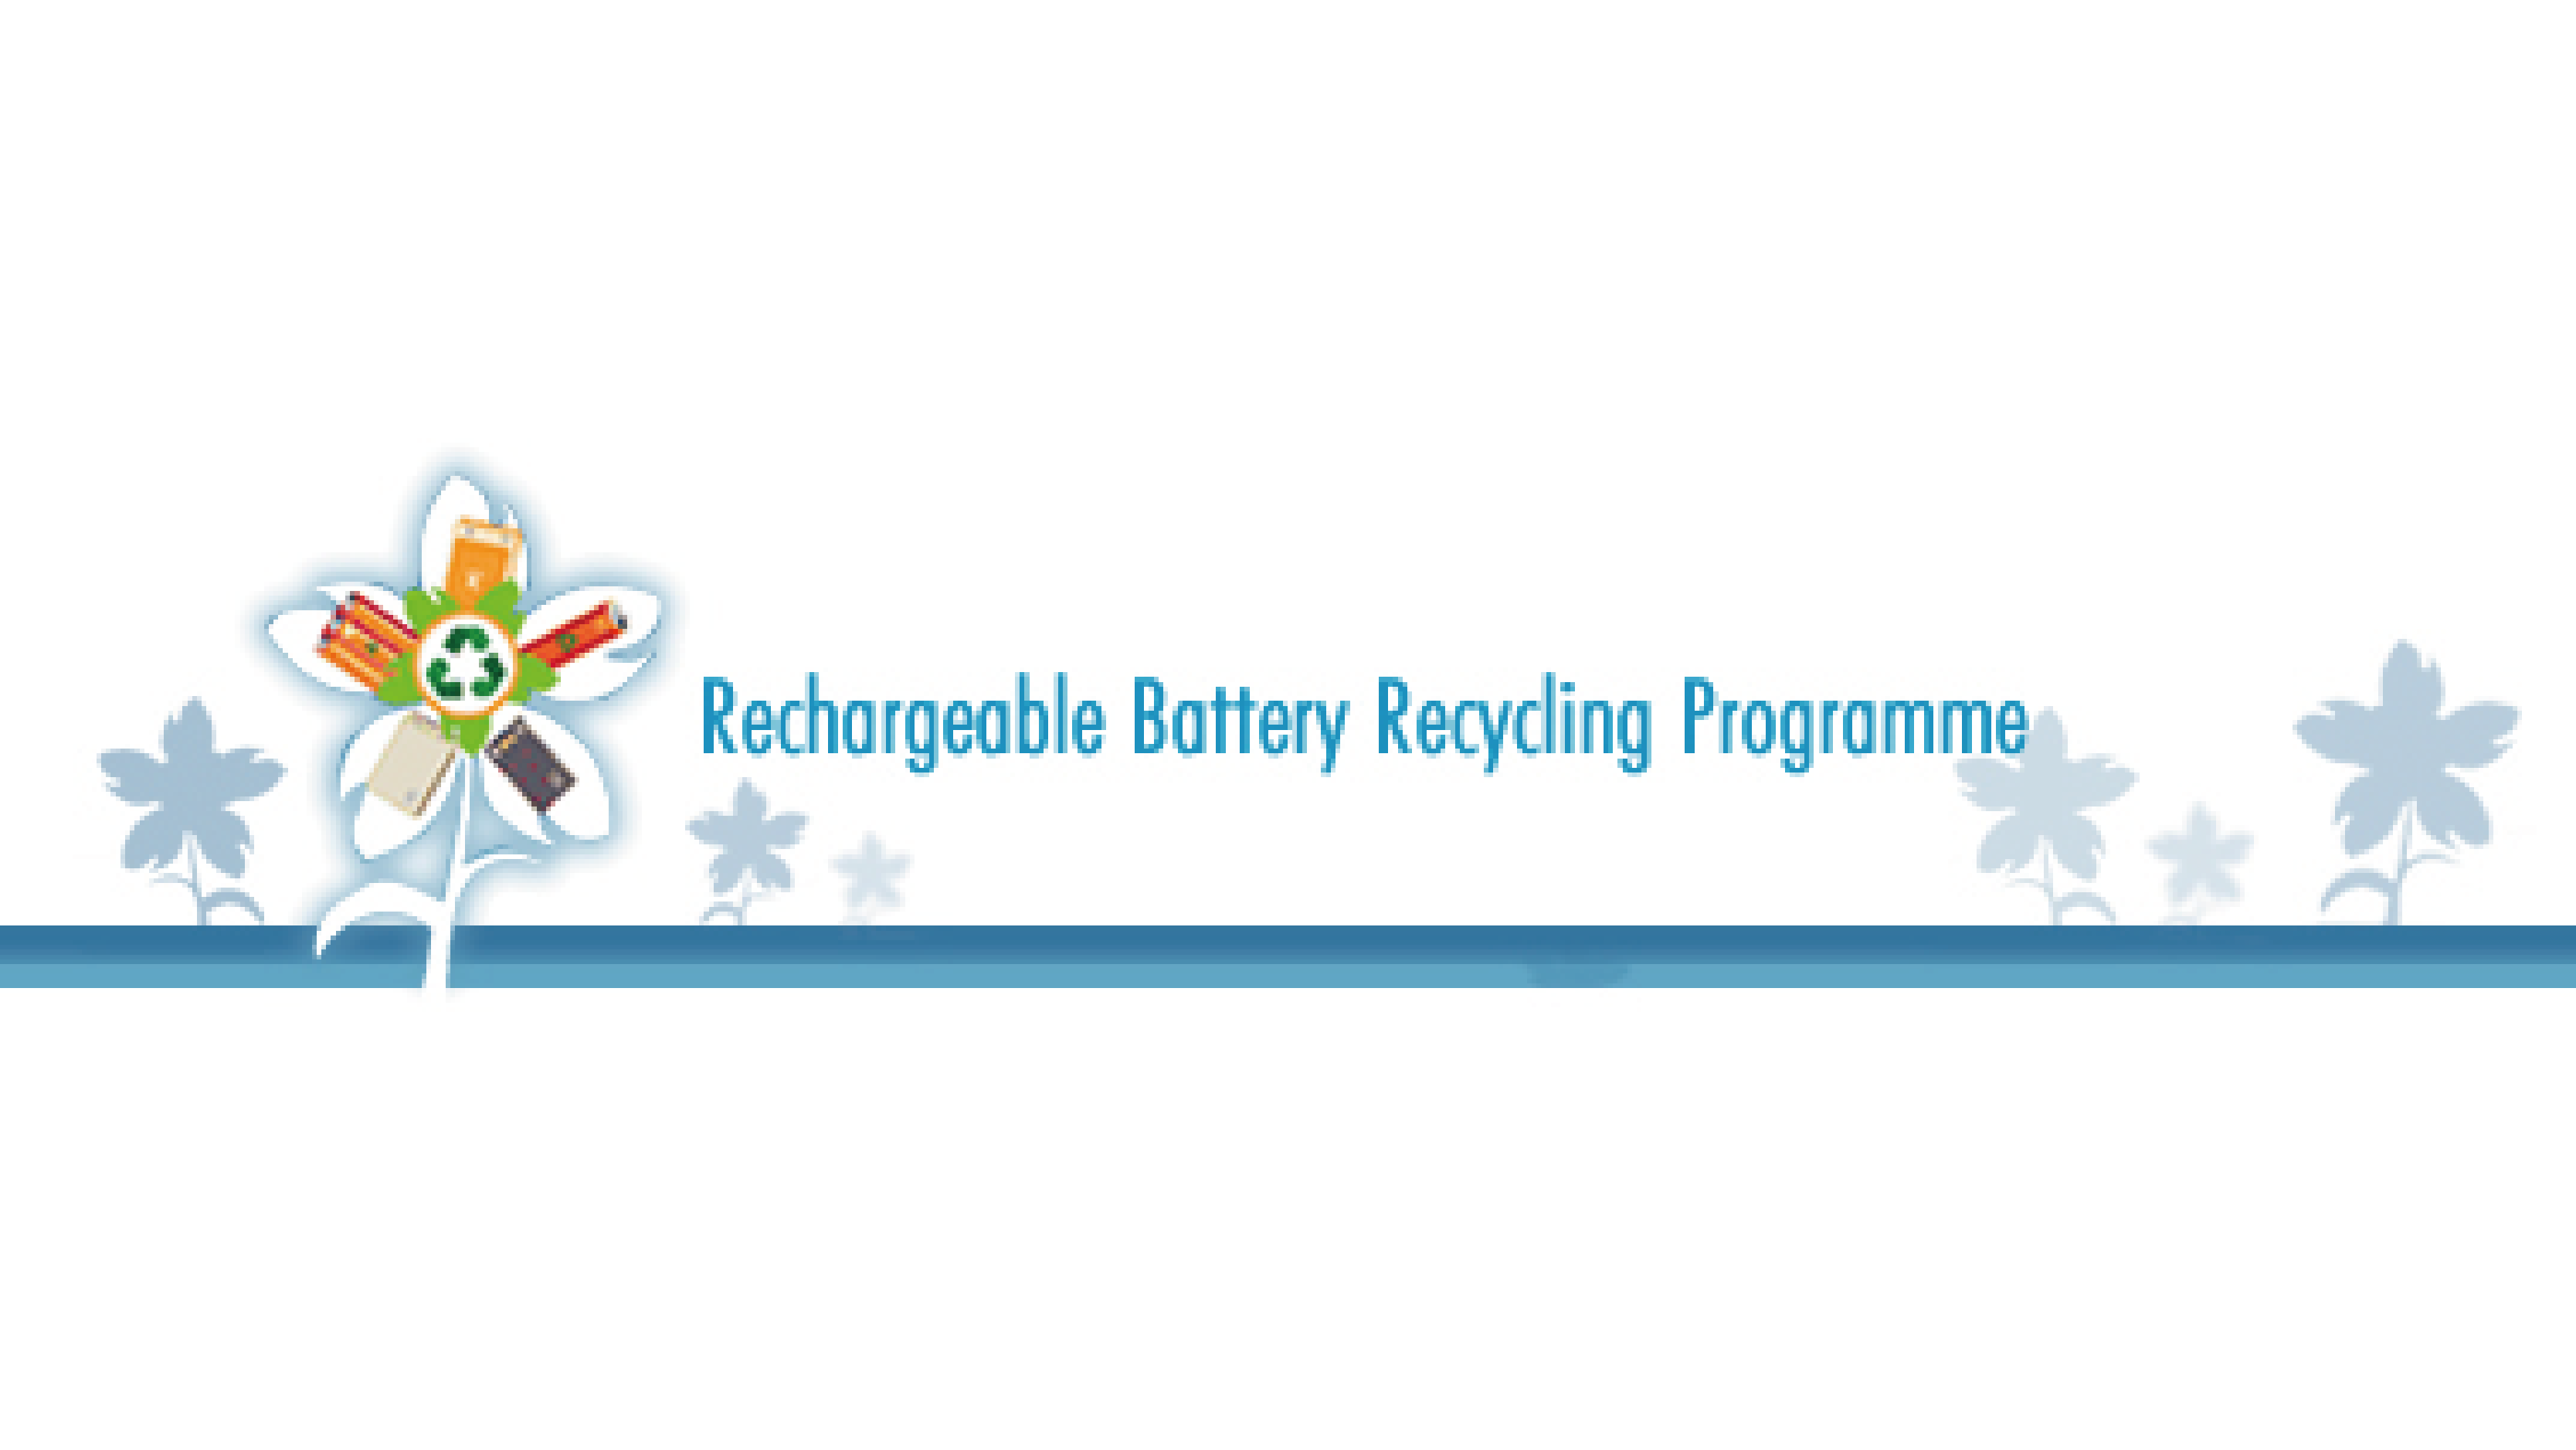 Rechargeable Battery Recycling Programme